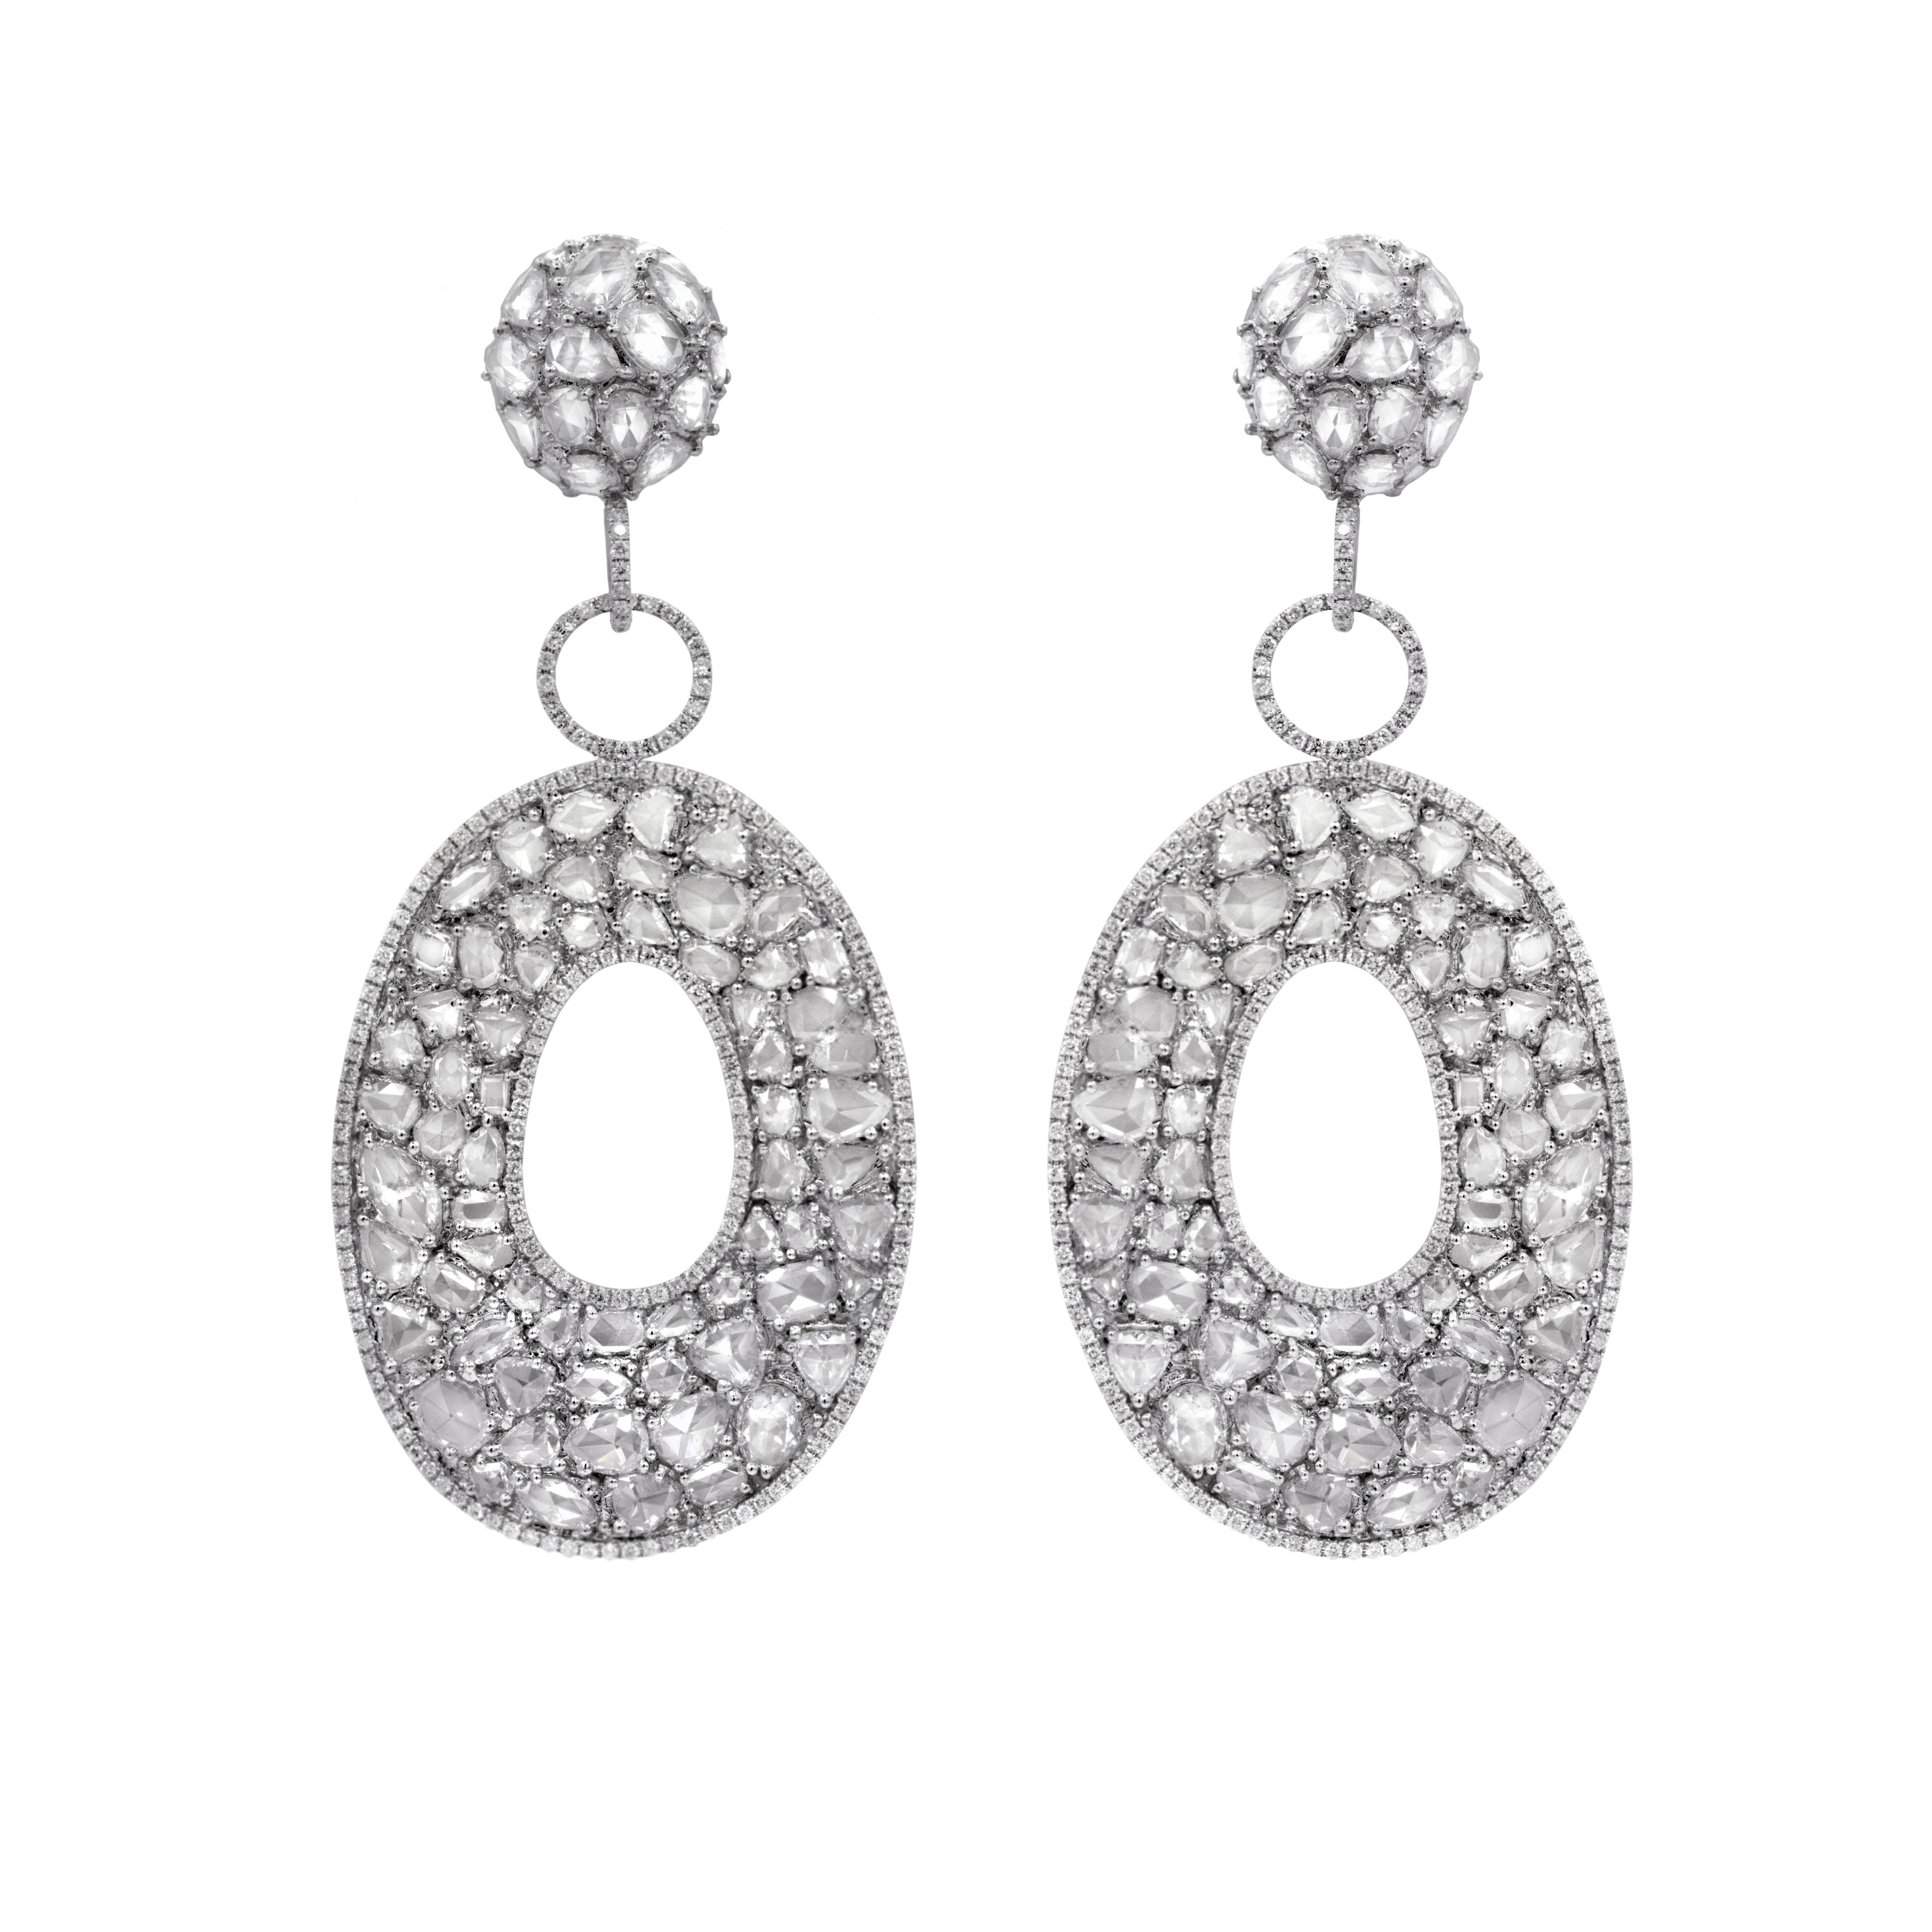 One of a kind very large size diamond earrings, features 27.00 carats combination of Rose cut and brilliant cut diamonds. The earrings are 3.5